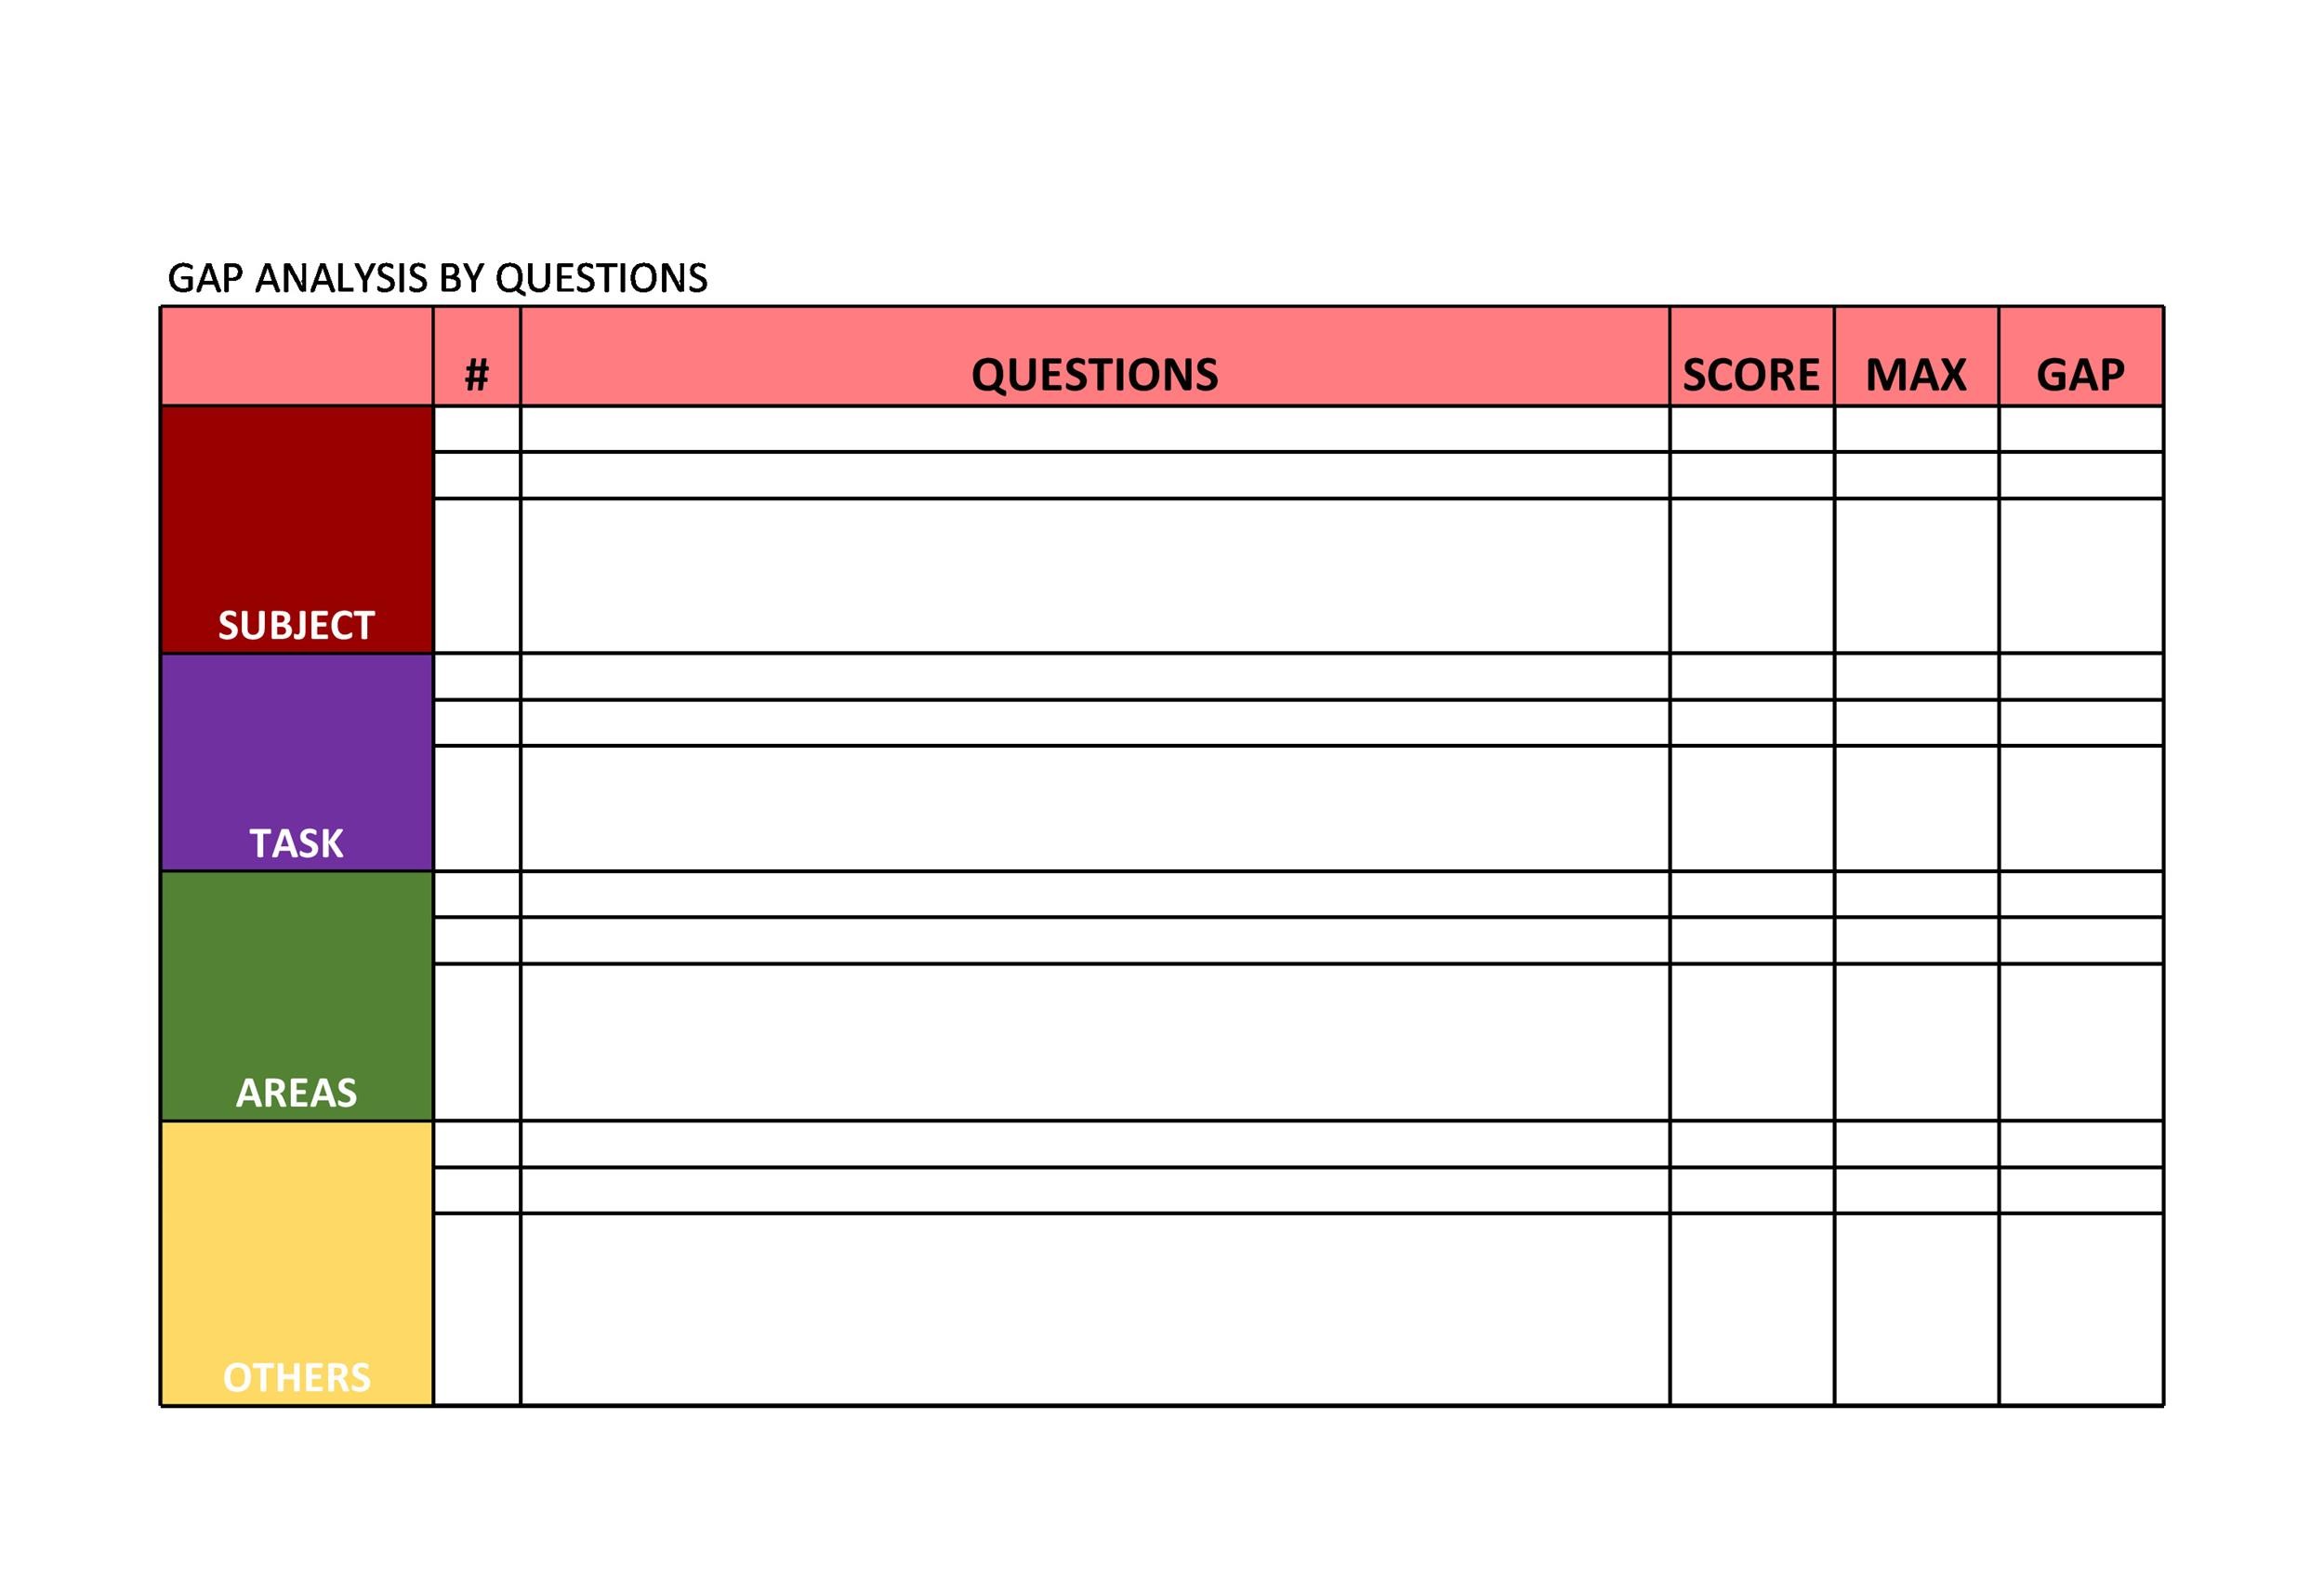 Knowledge Rating Chart Template